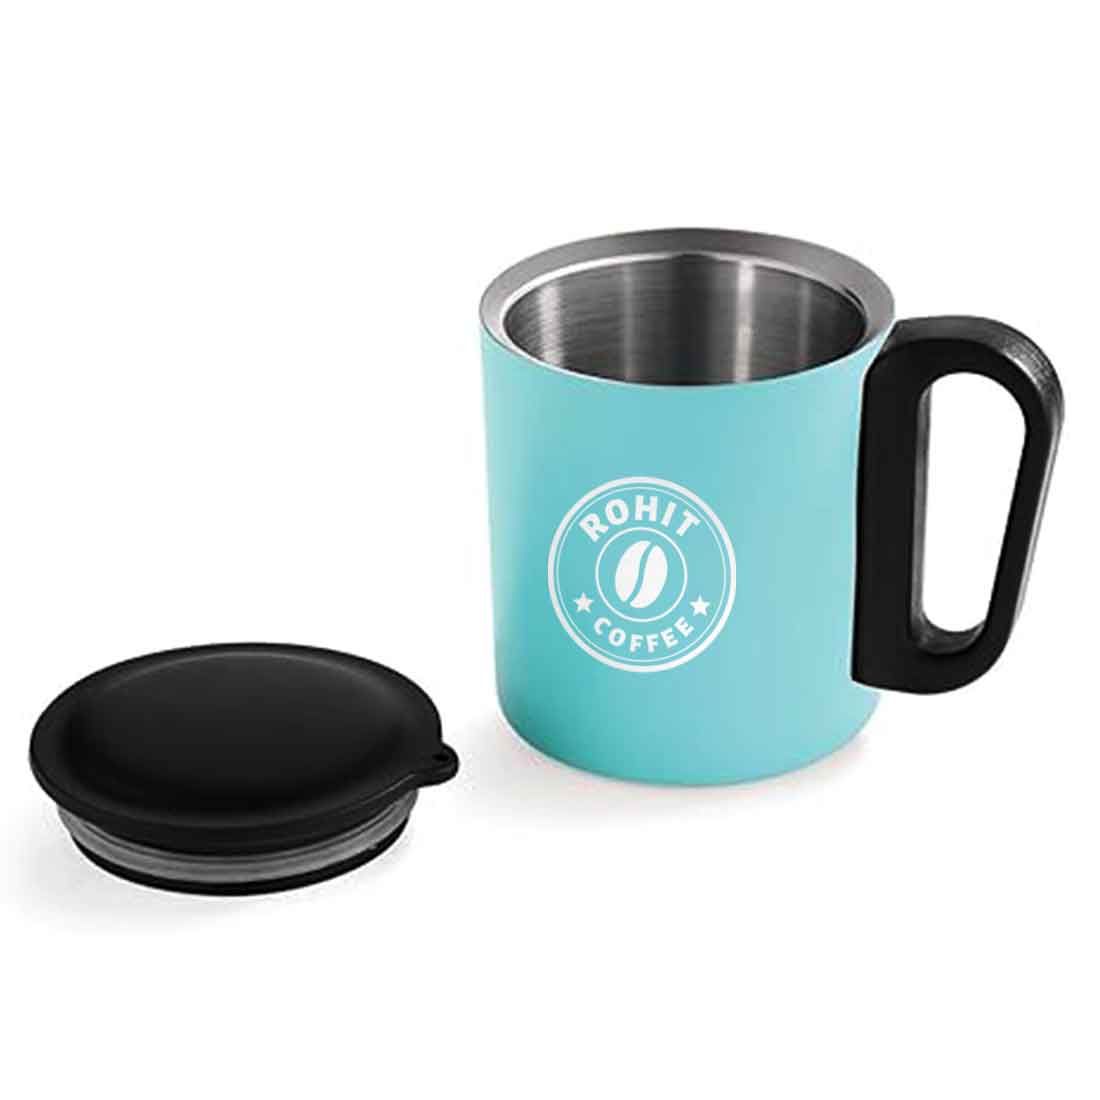 Custom Cups with Lids for Coffee - Insulated Stainless Steel Mugs